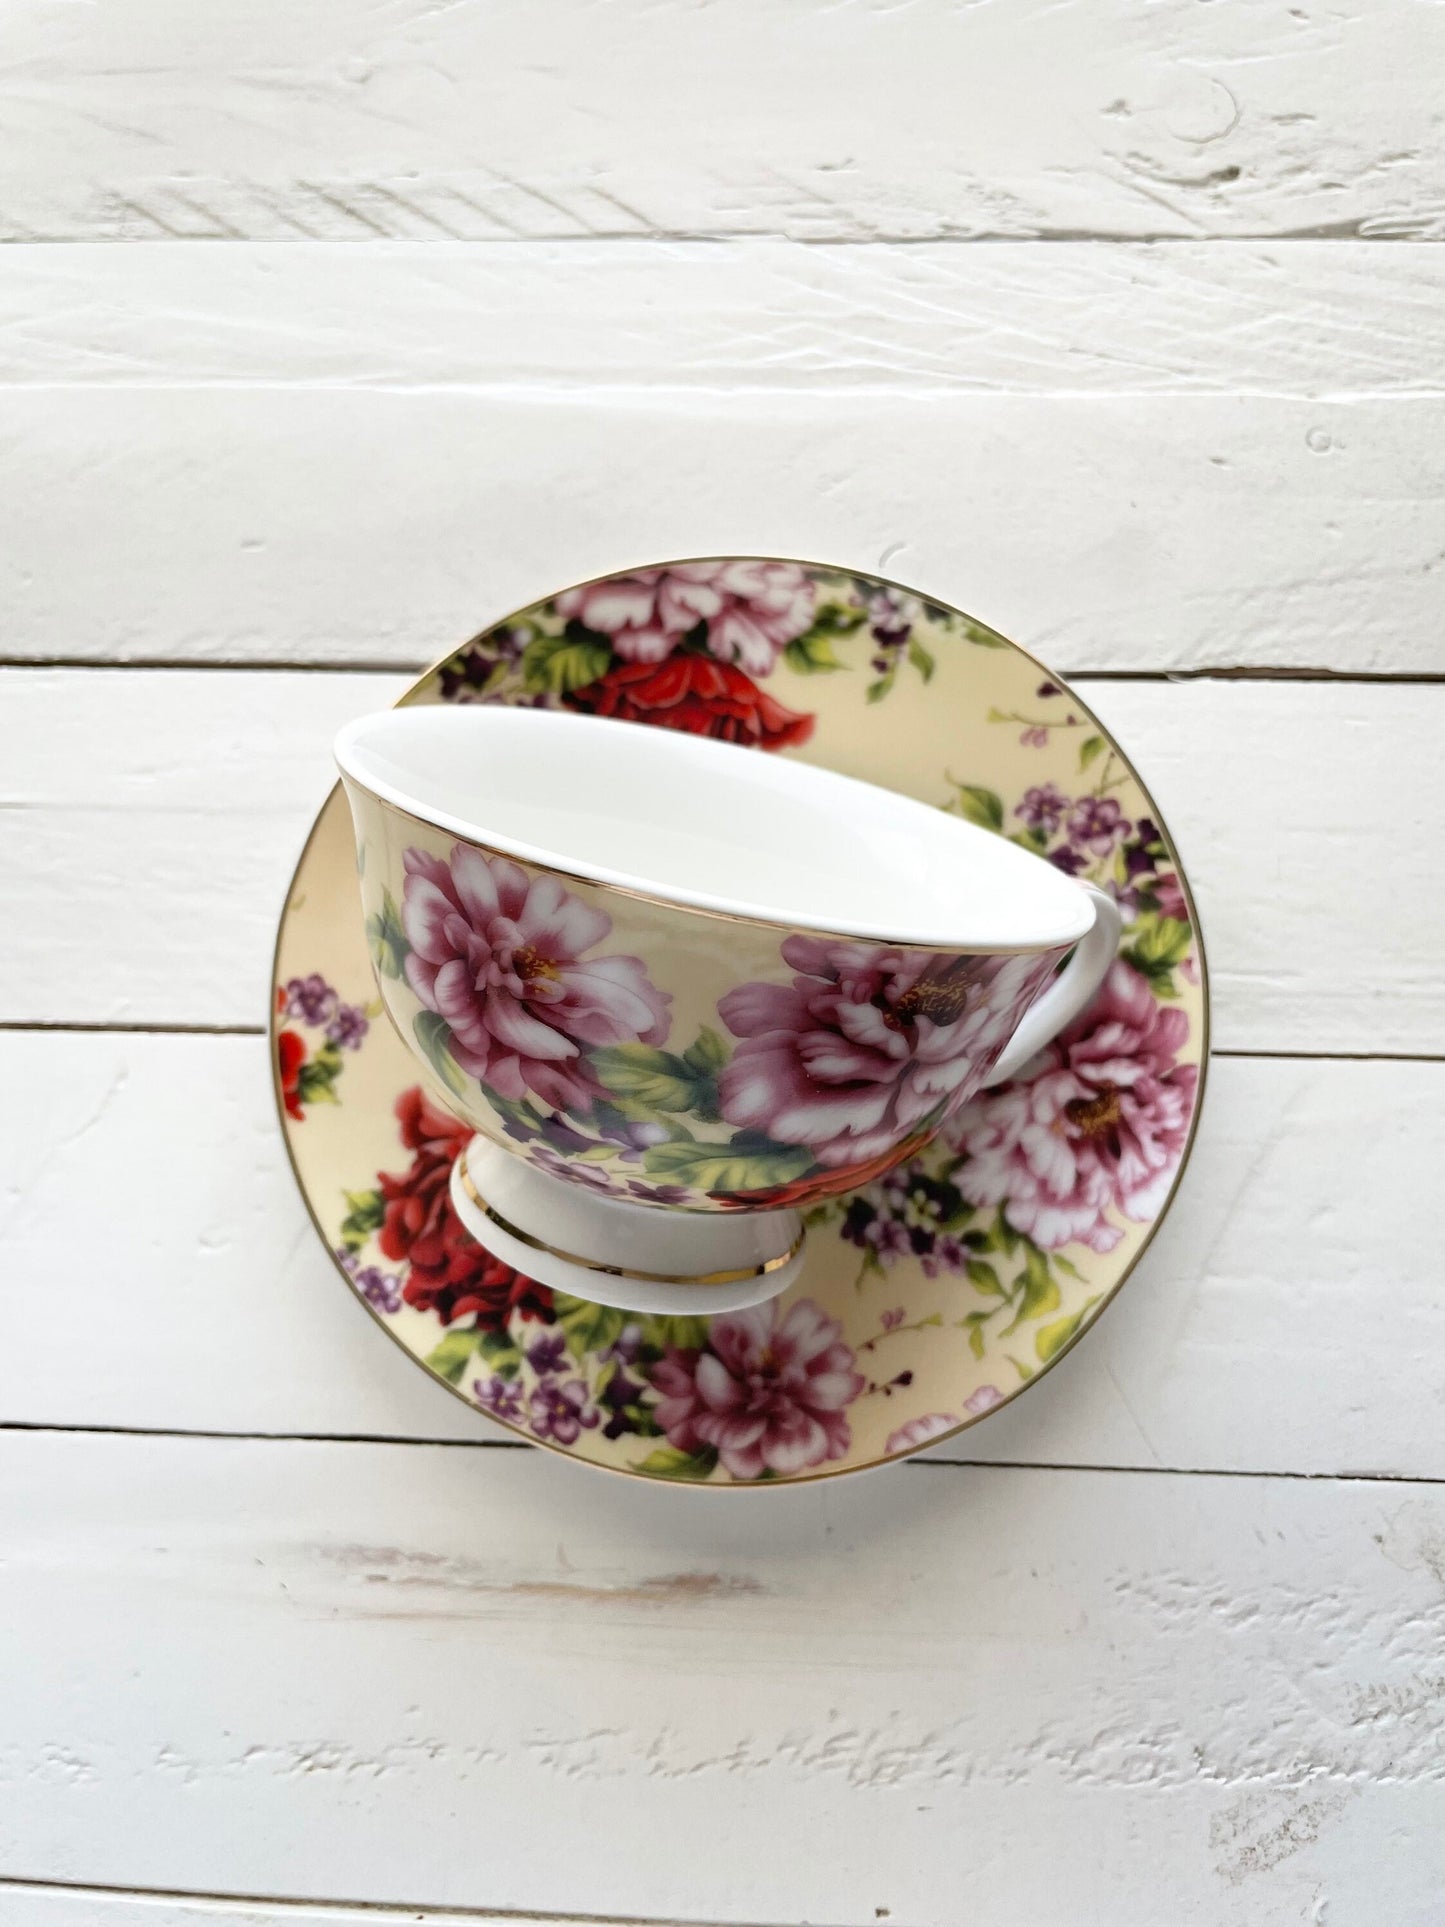 Bad Bitch, Tea cup and saucer, Yellow and Red Floral